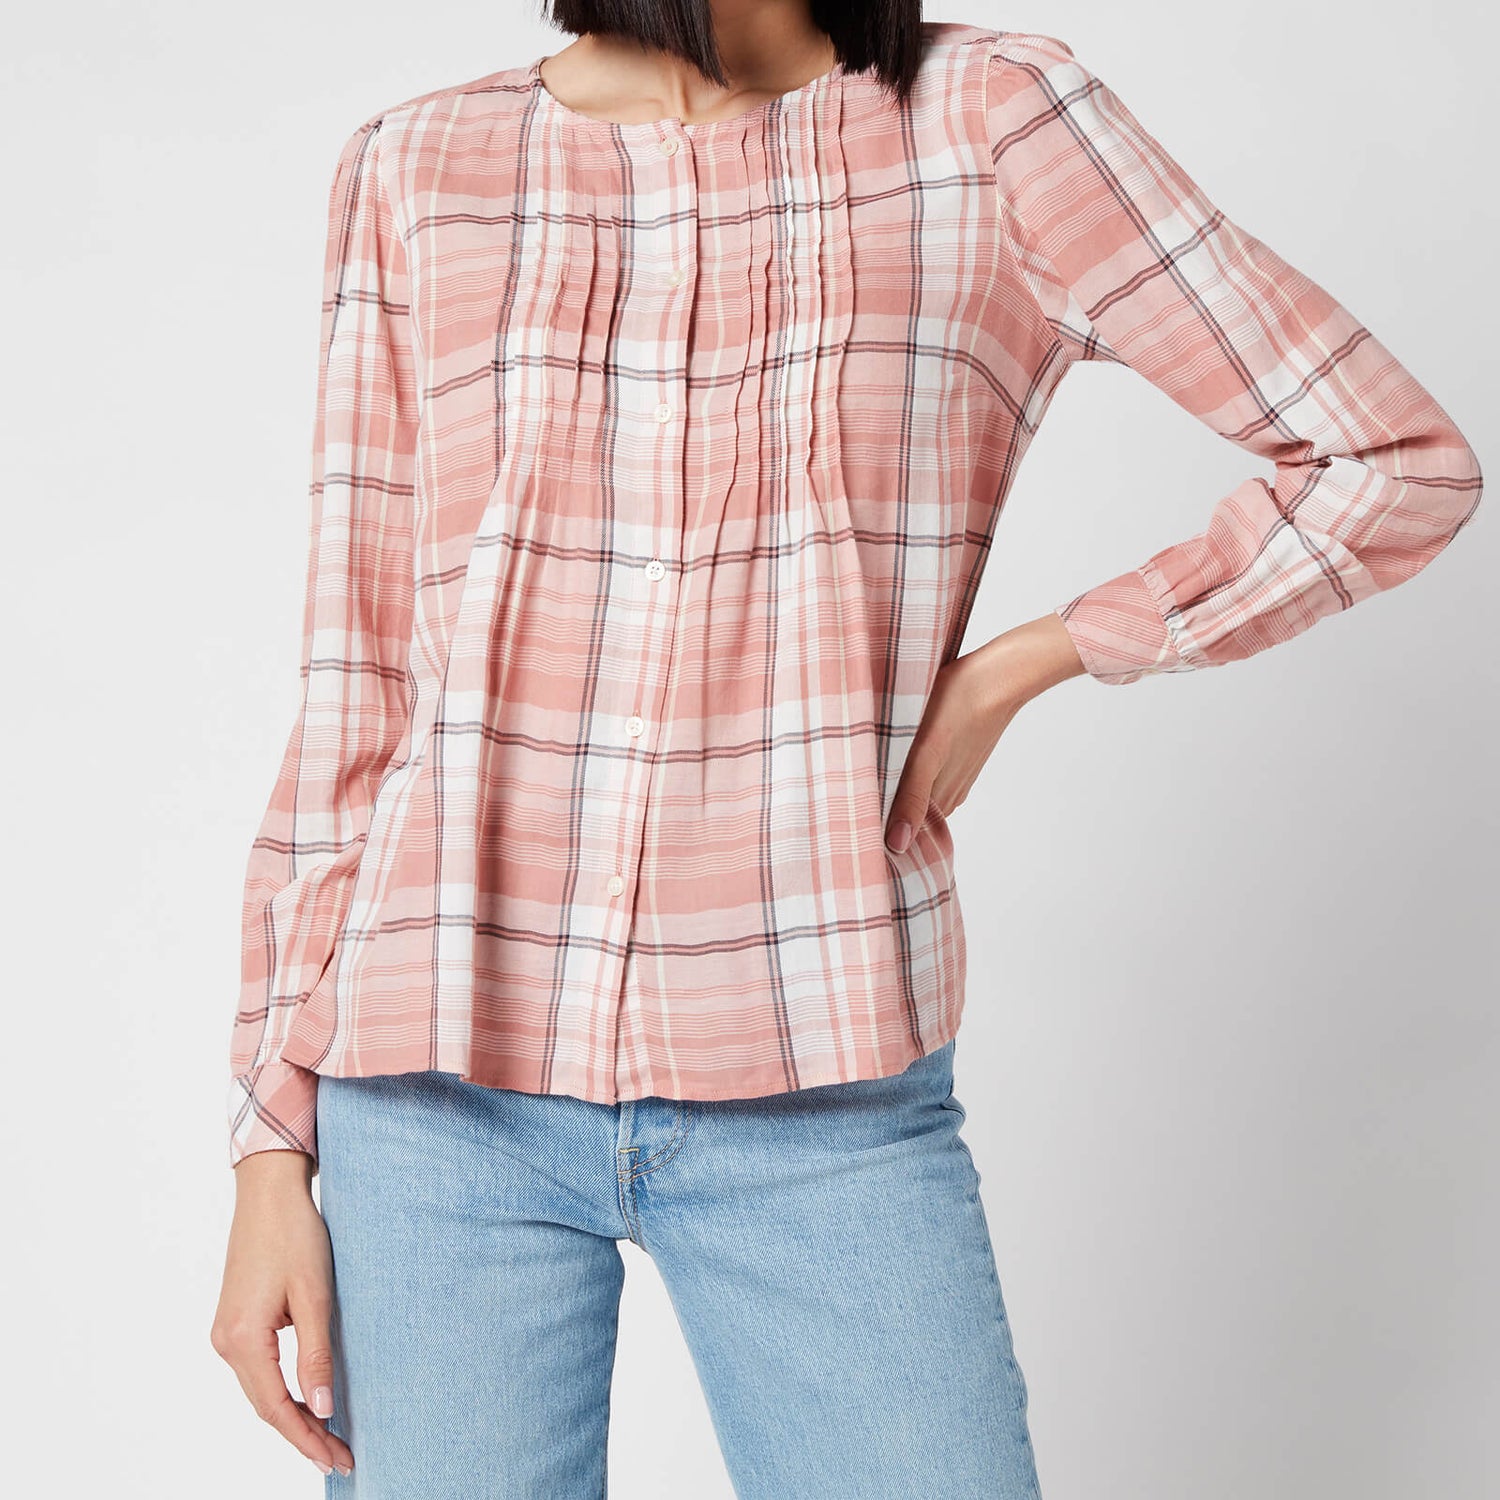 Barbour Women's Barrier Top - Multi Check